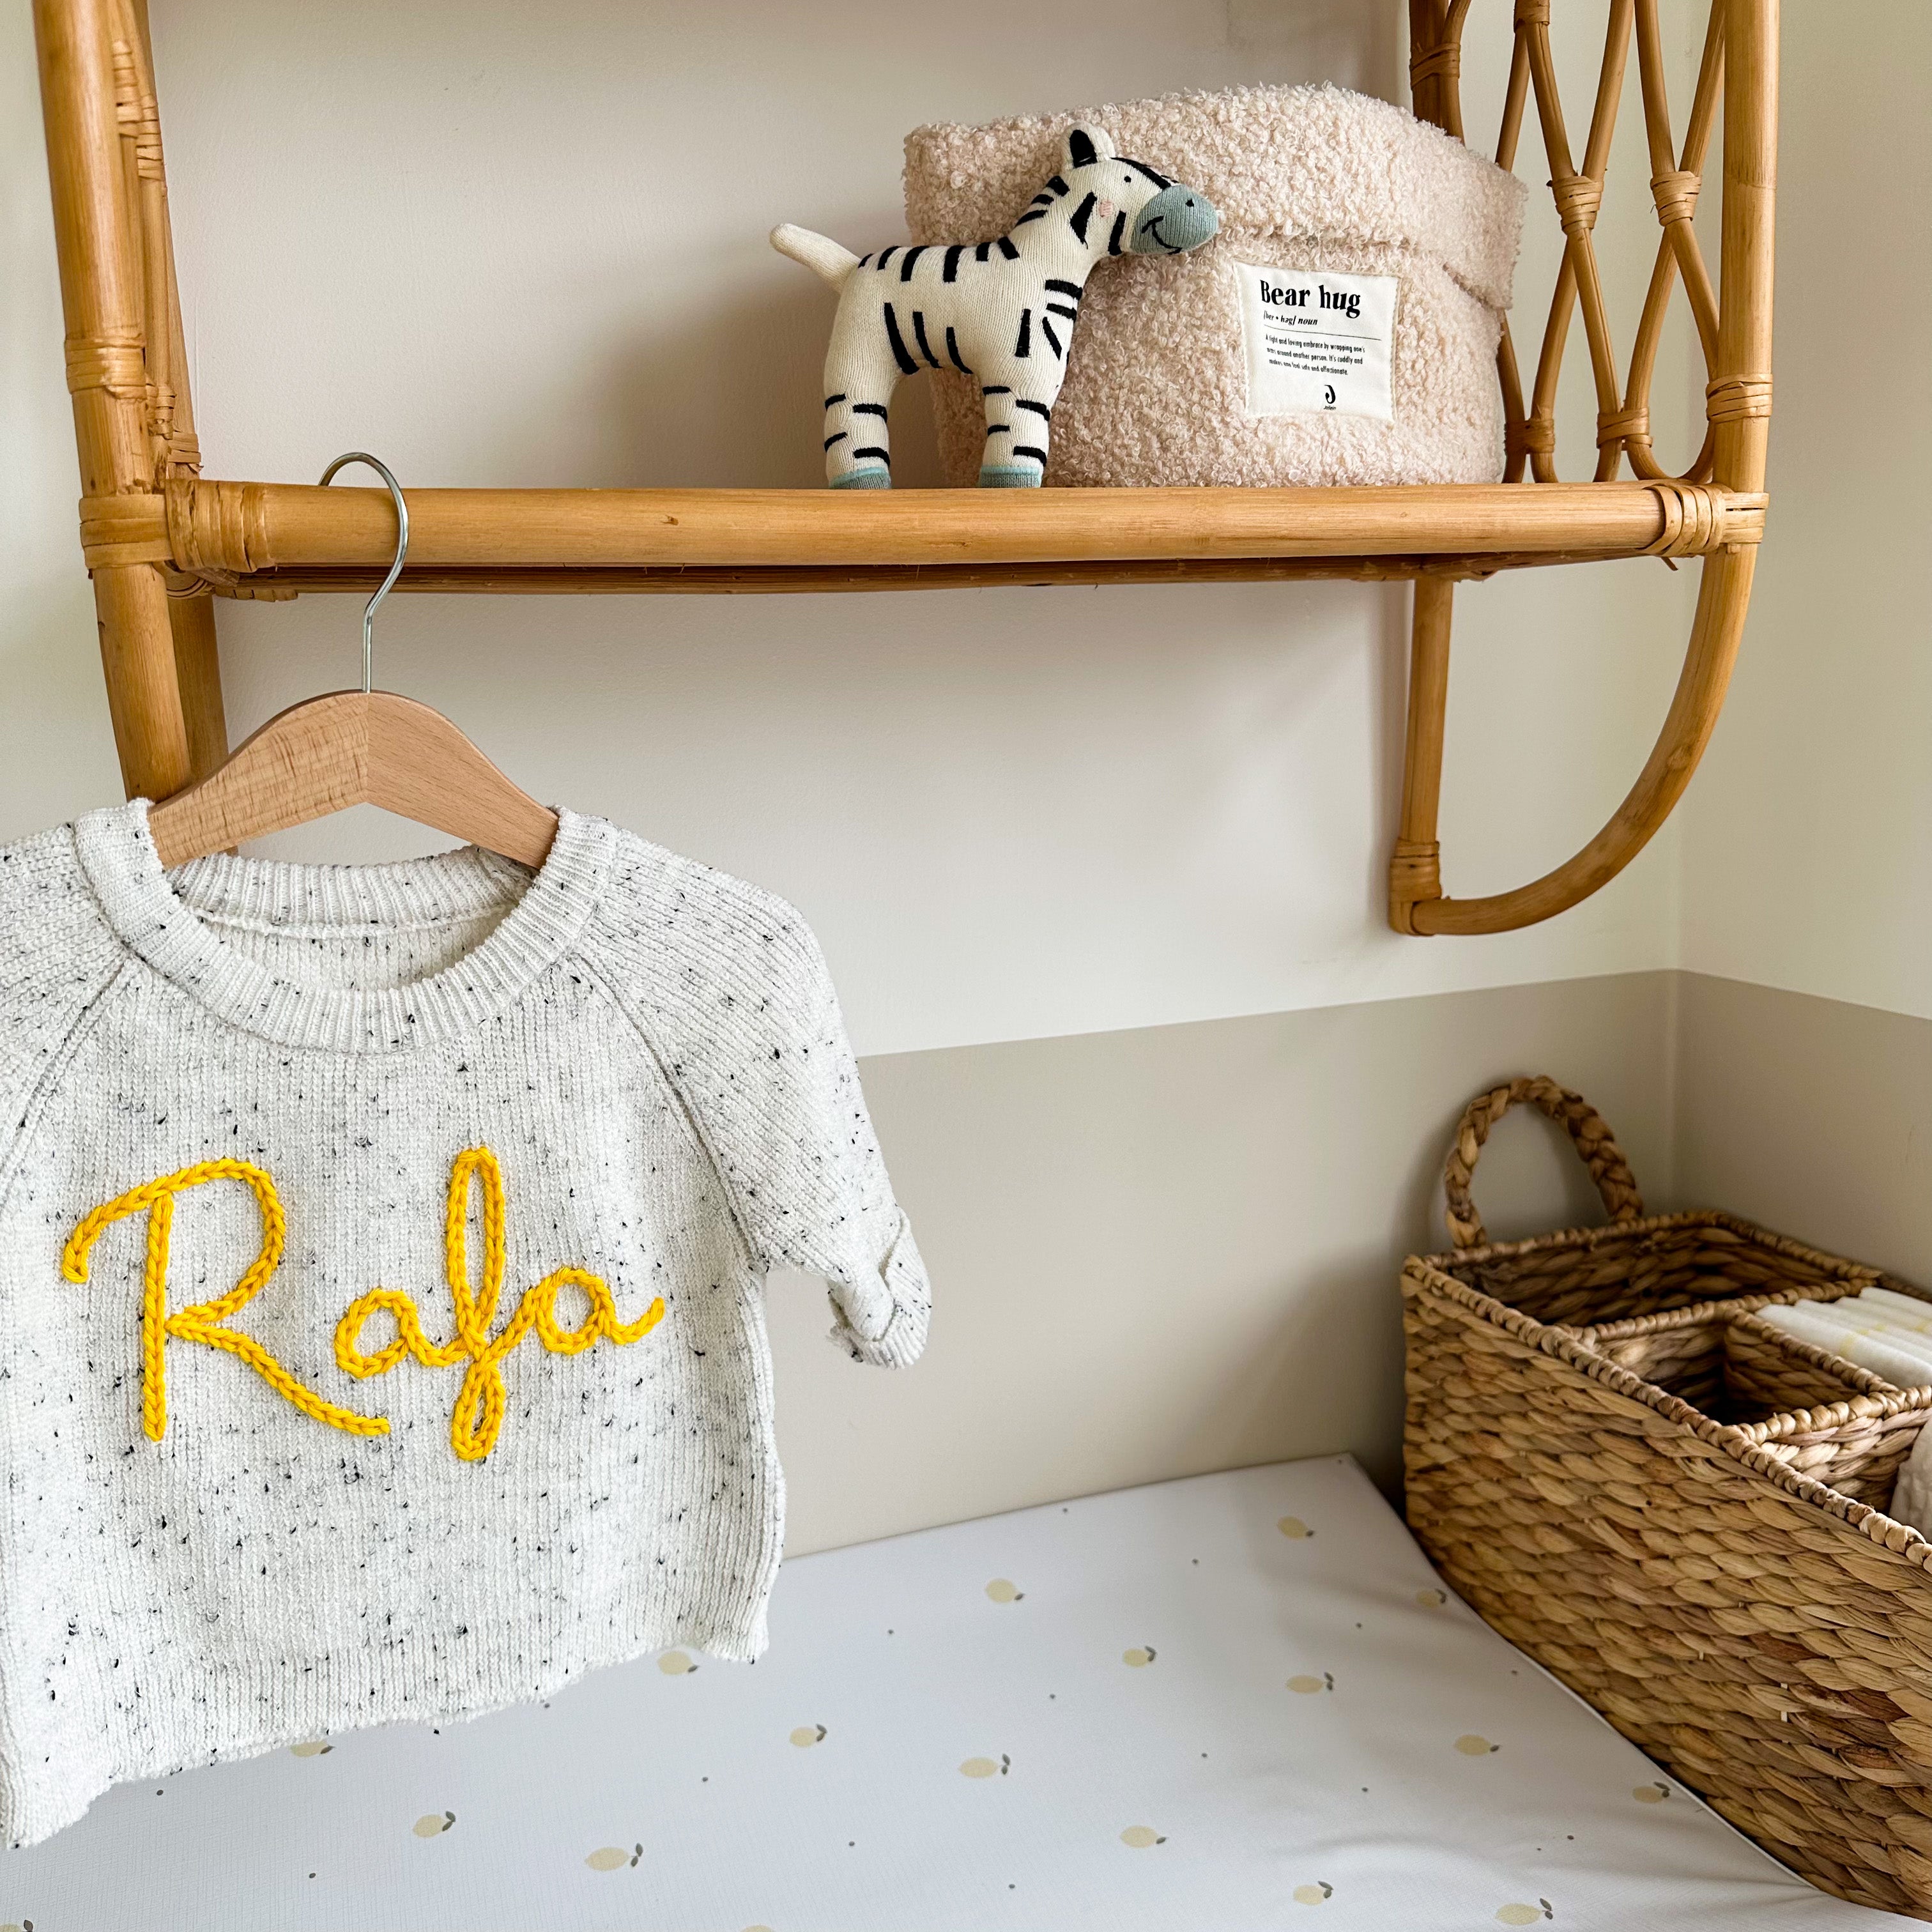 Speckled Off White Personalised Name Sweater